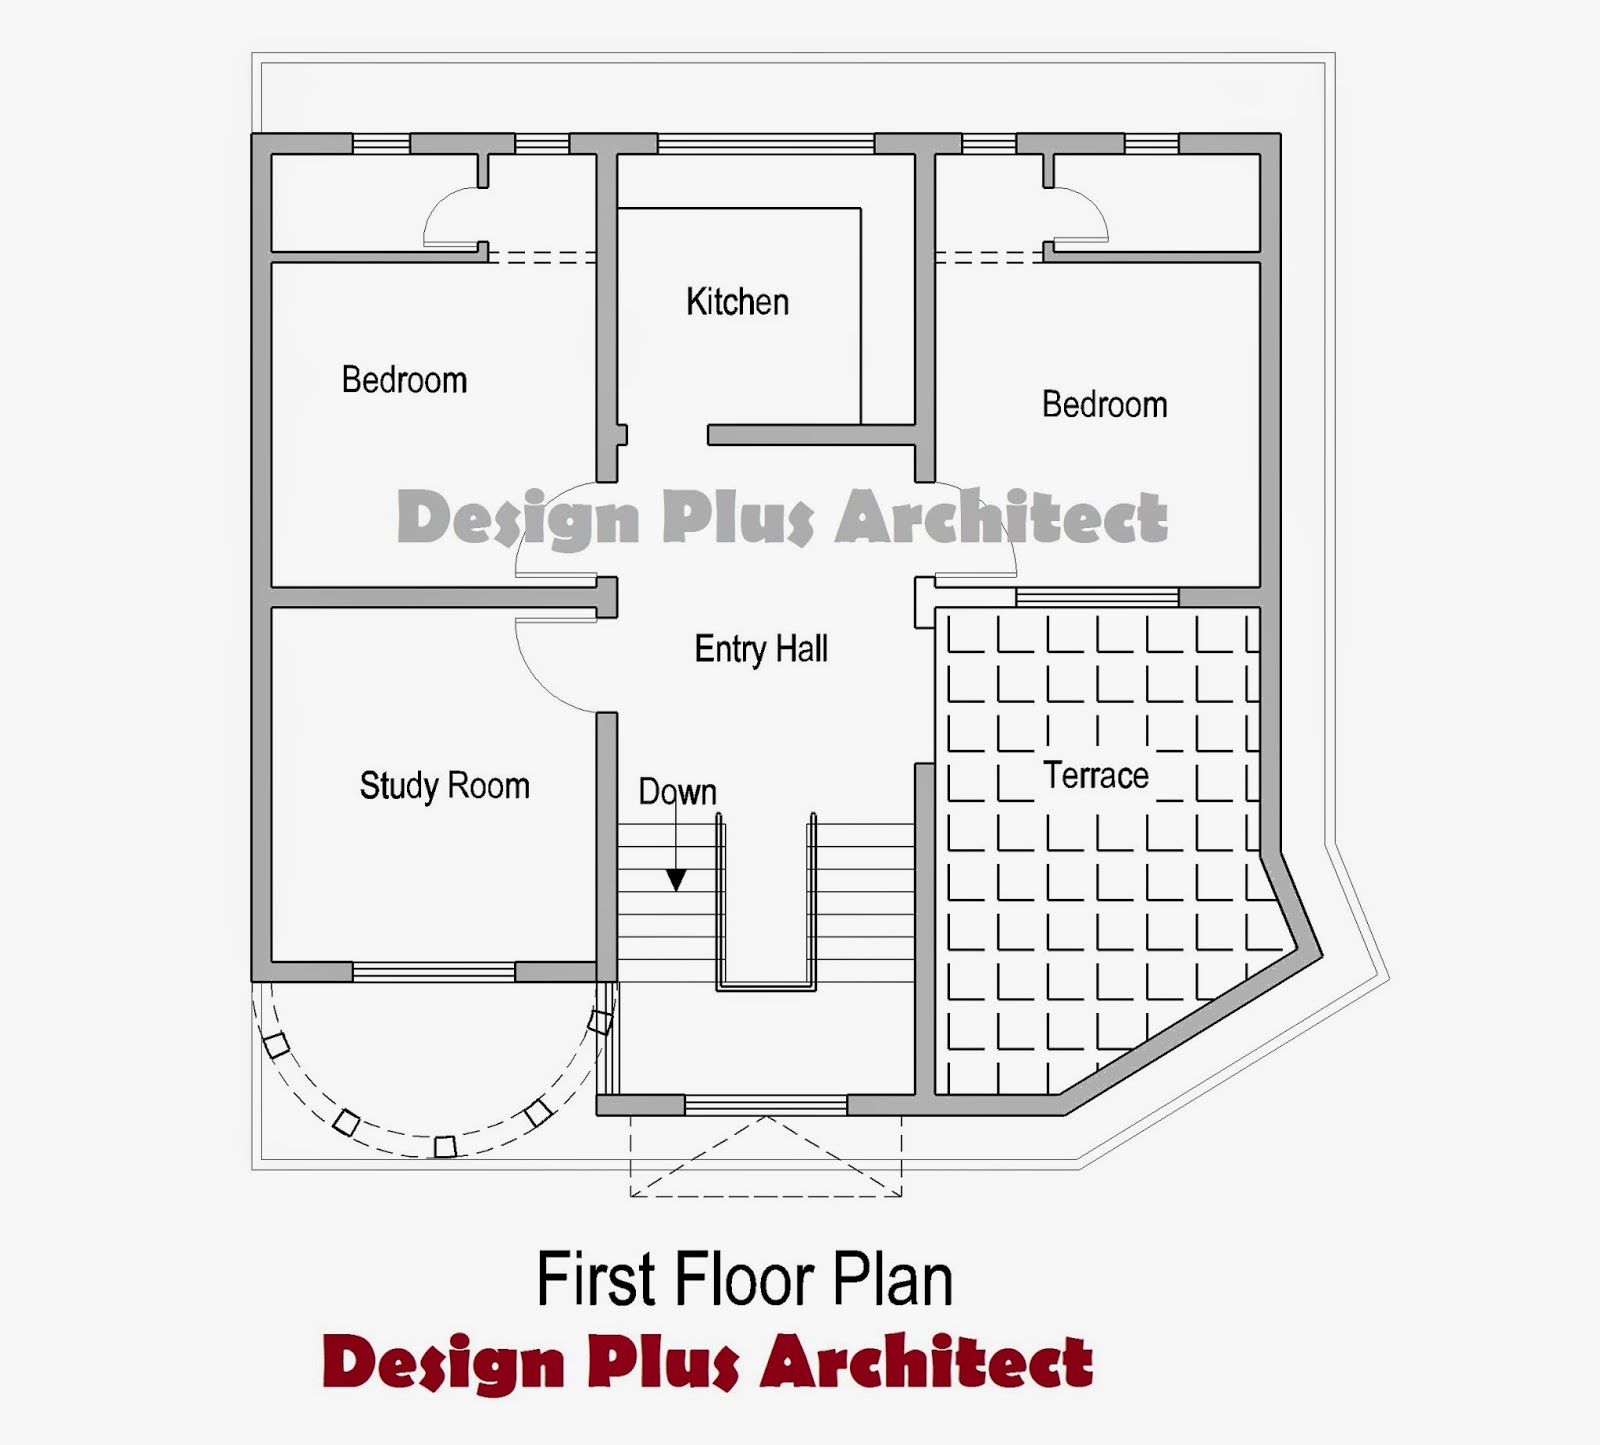 Home Plans In Pakistan and Architect Designer